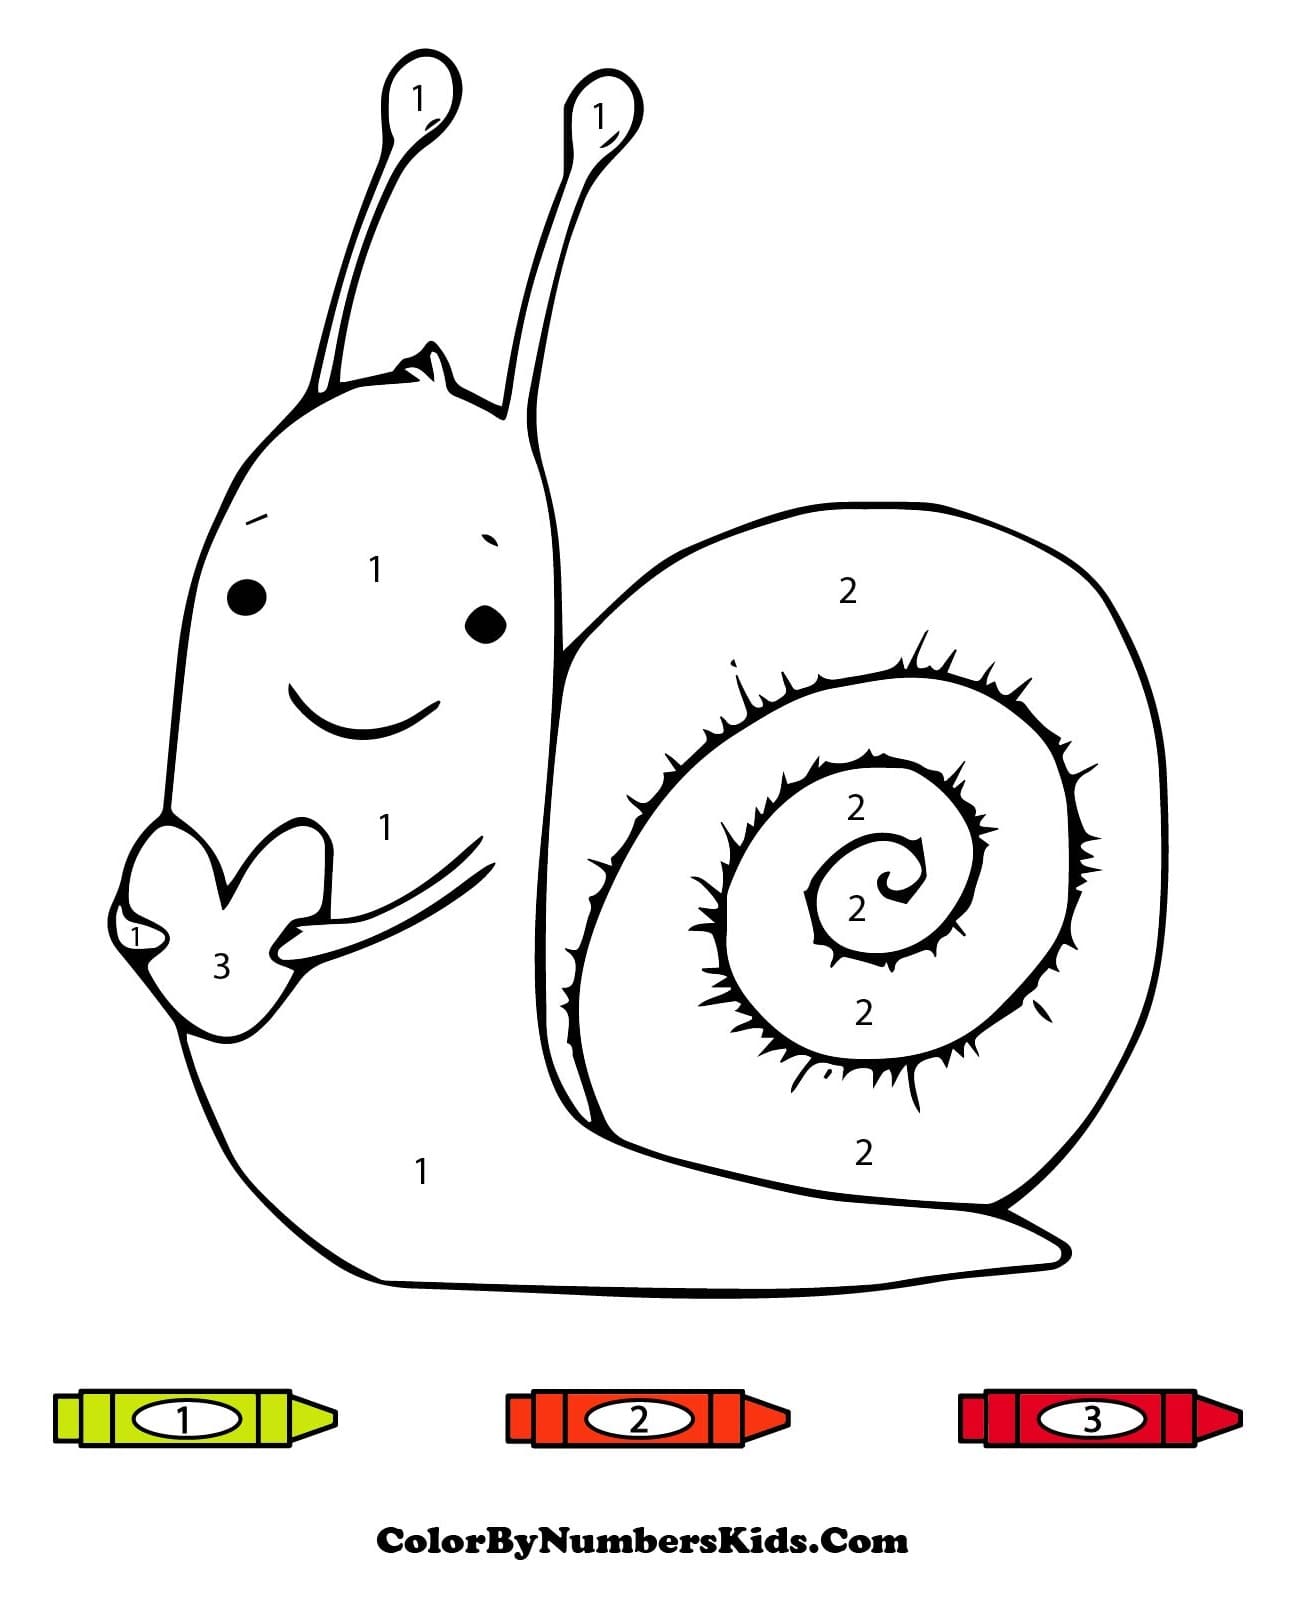 Printable Snail Color By Number